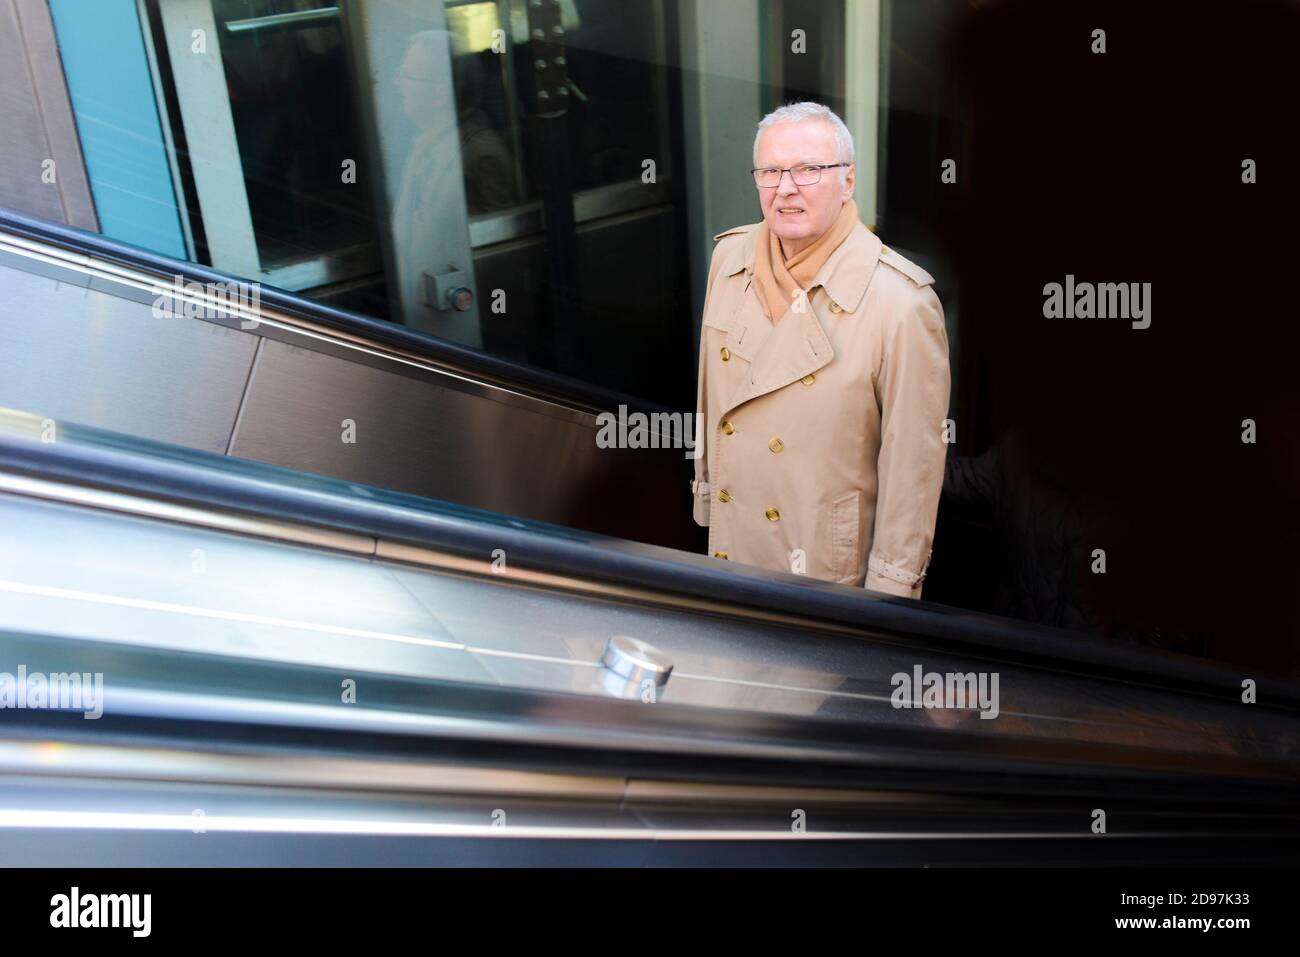 Vienna, AUSTRIA - MARCH 12, 2013: Man coming out of the underground station Stock Photo